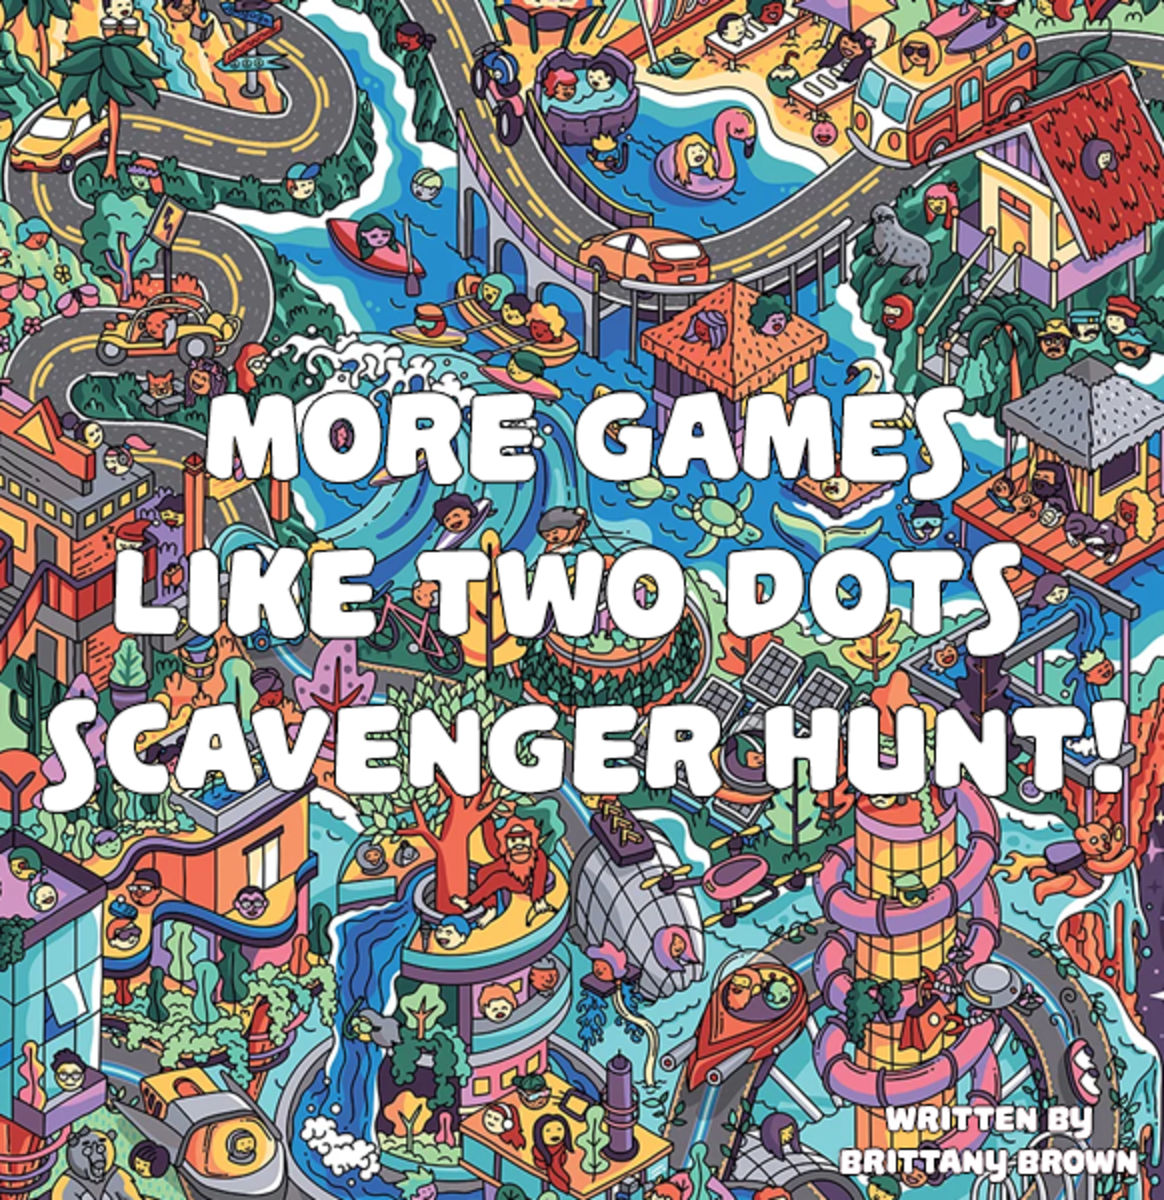 Here's a list of games similar to the Two Dots Scavenger Hunt mini-game!